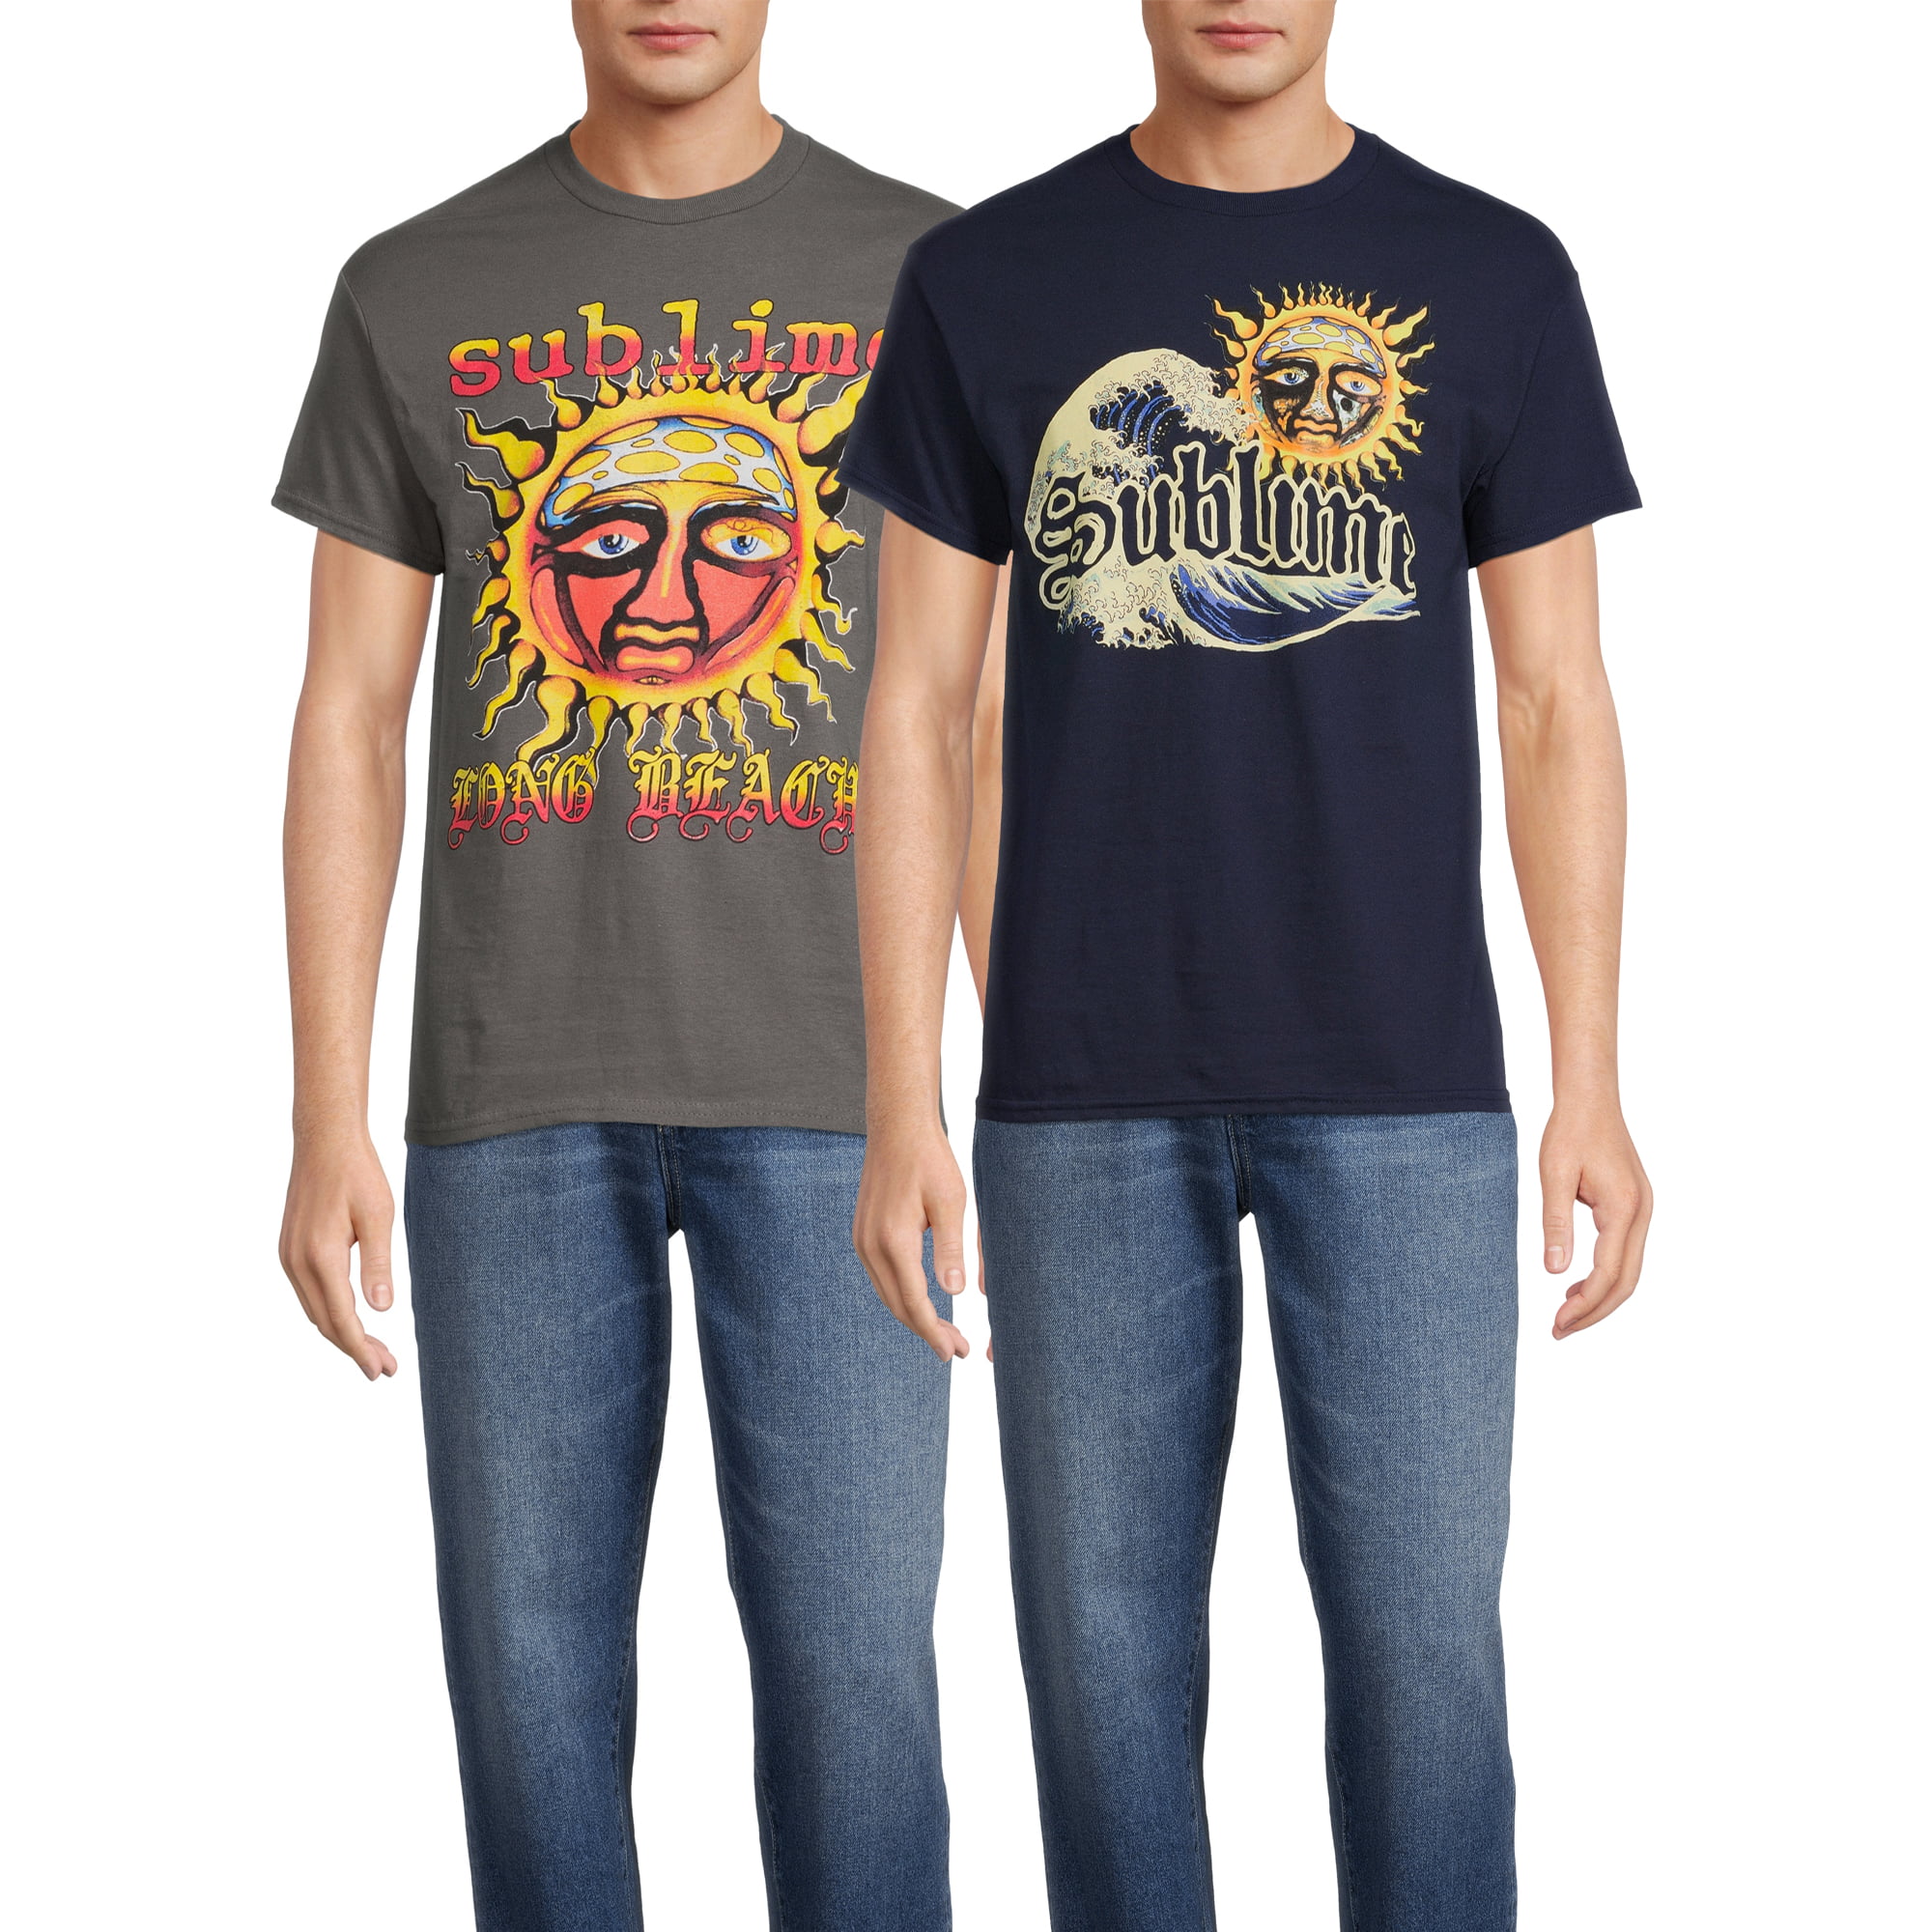 Sublime Men's & Big Graphic Band T-Shirts with Short Sleeves, 2-Pack - Walmart.com